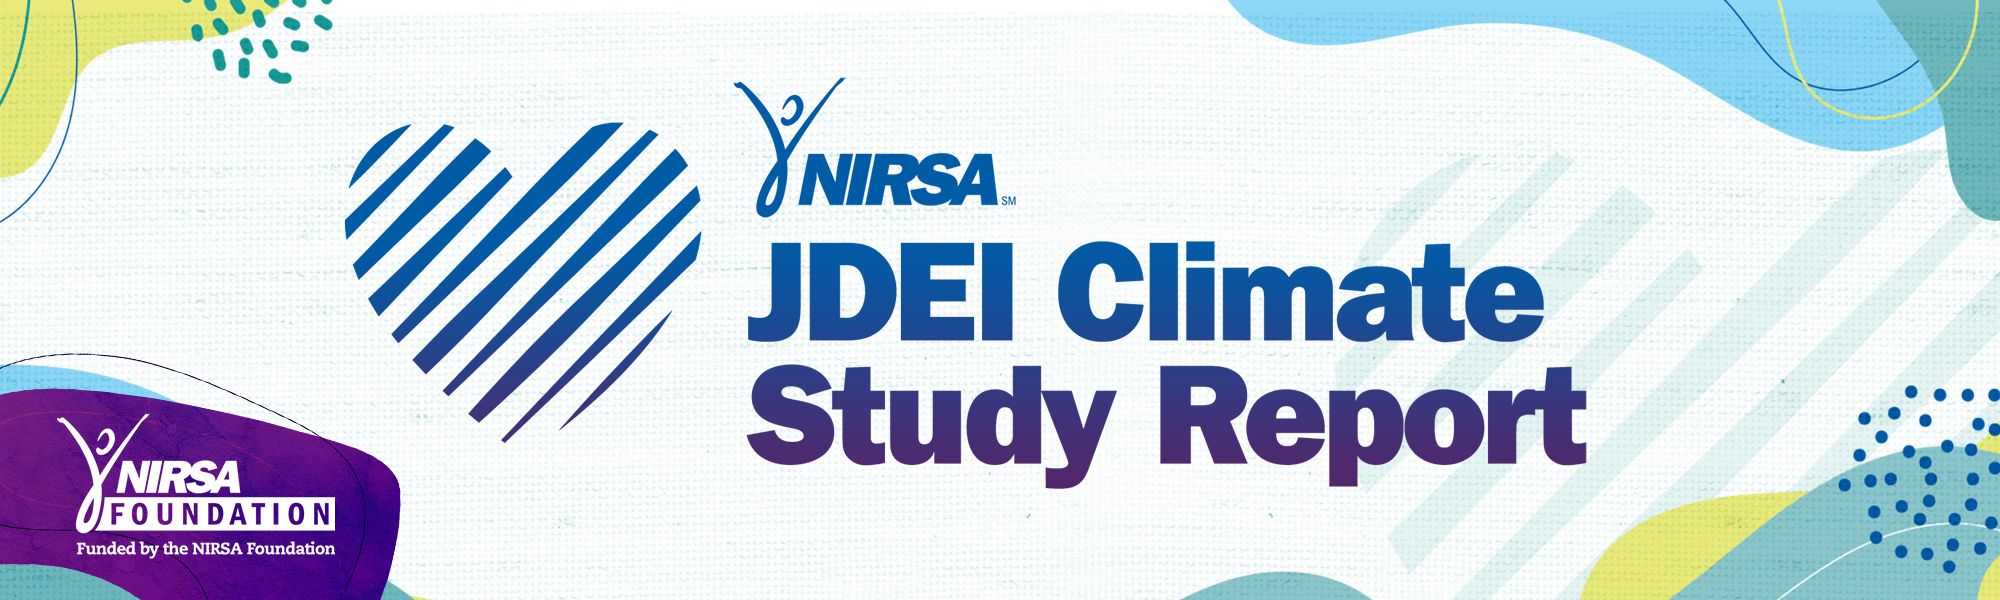 JDEI Climate Study Insights Full Report